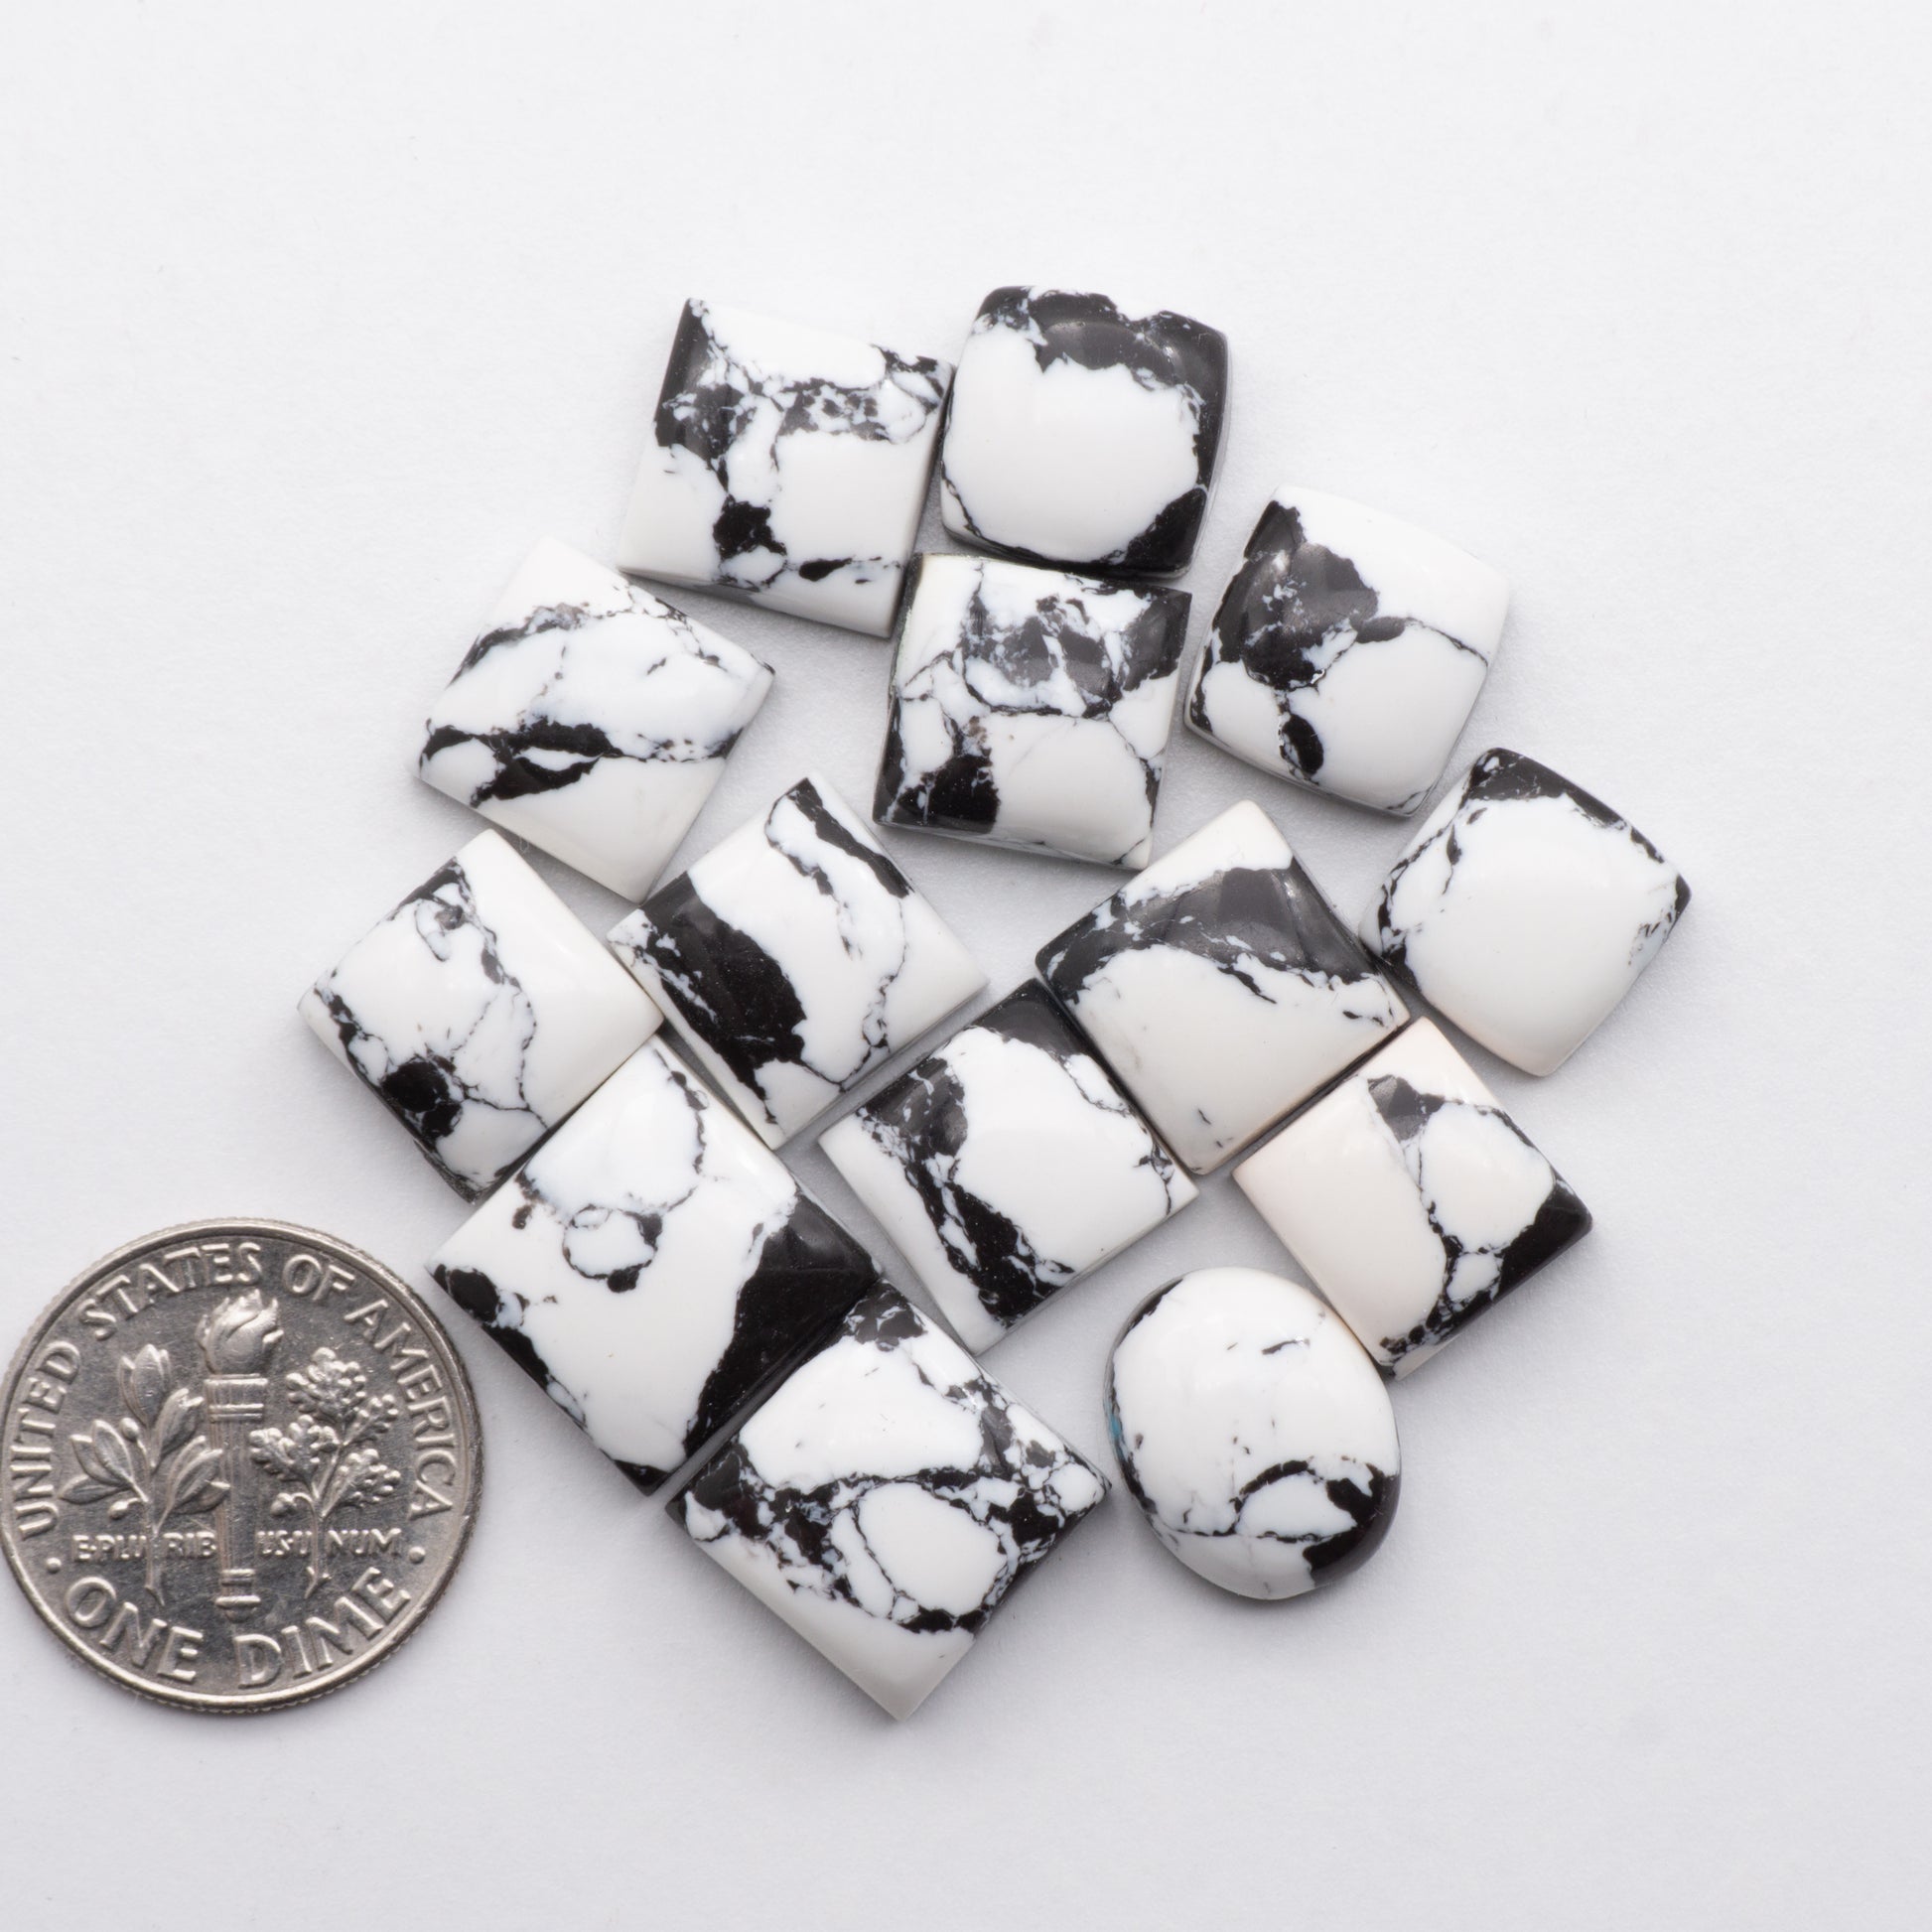 These White Buffalo Cabochons are expertly cut and polished from composite material to create a stunning and durable gemstone. Backed for added strength.